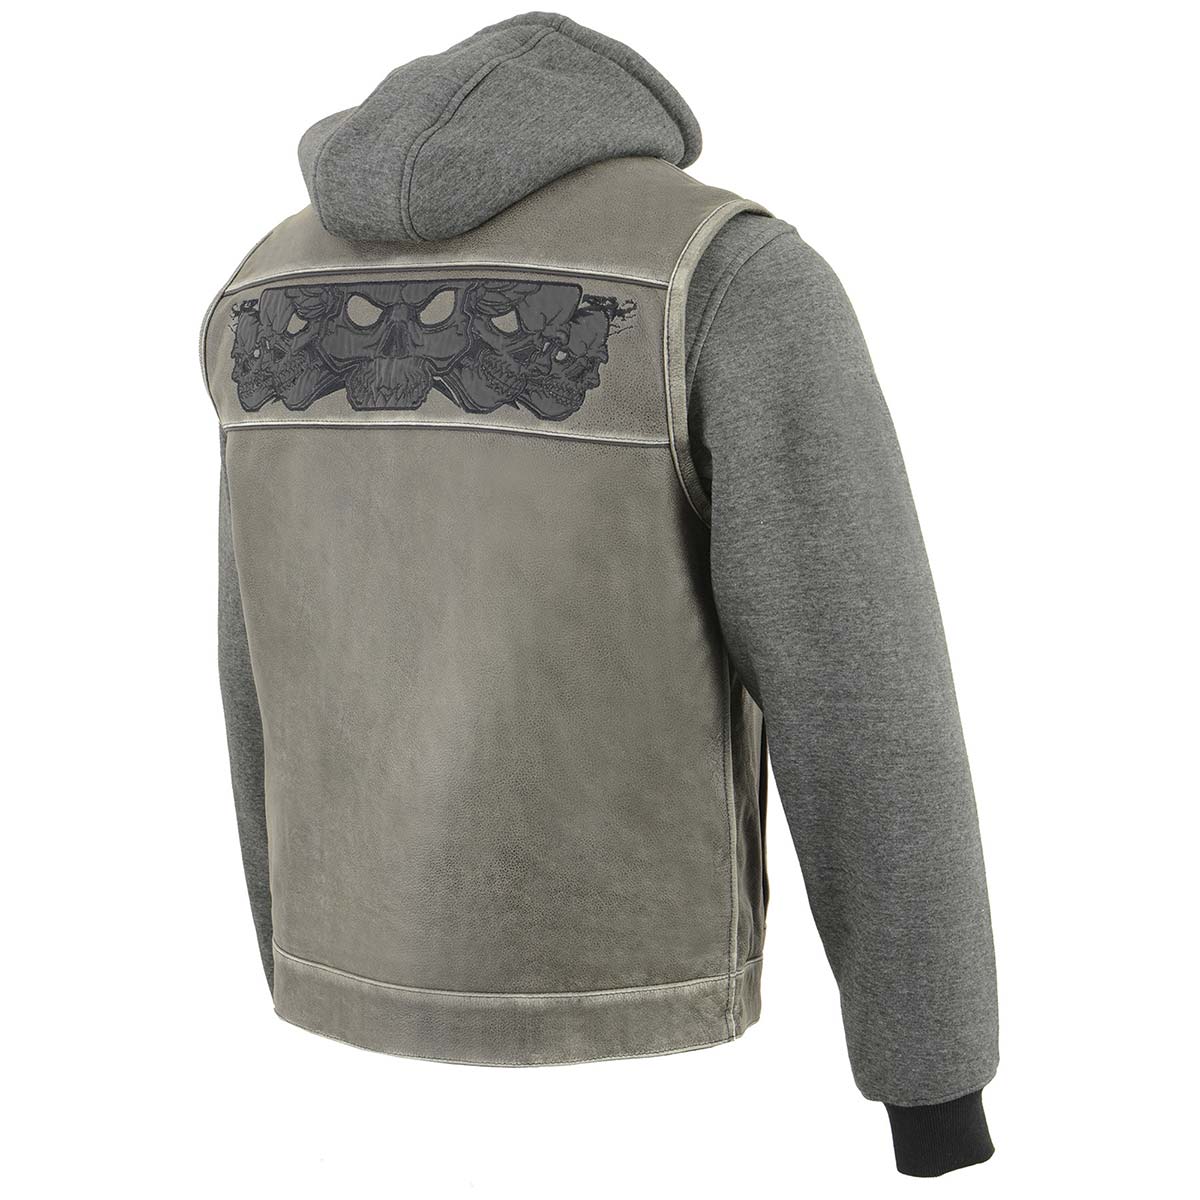 Men's '2 in 1' Distressed Grey Leather Vest with Reflective Skulls